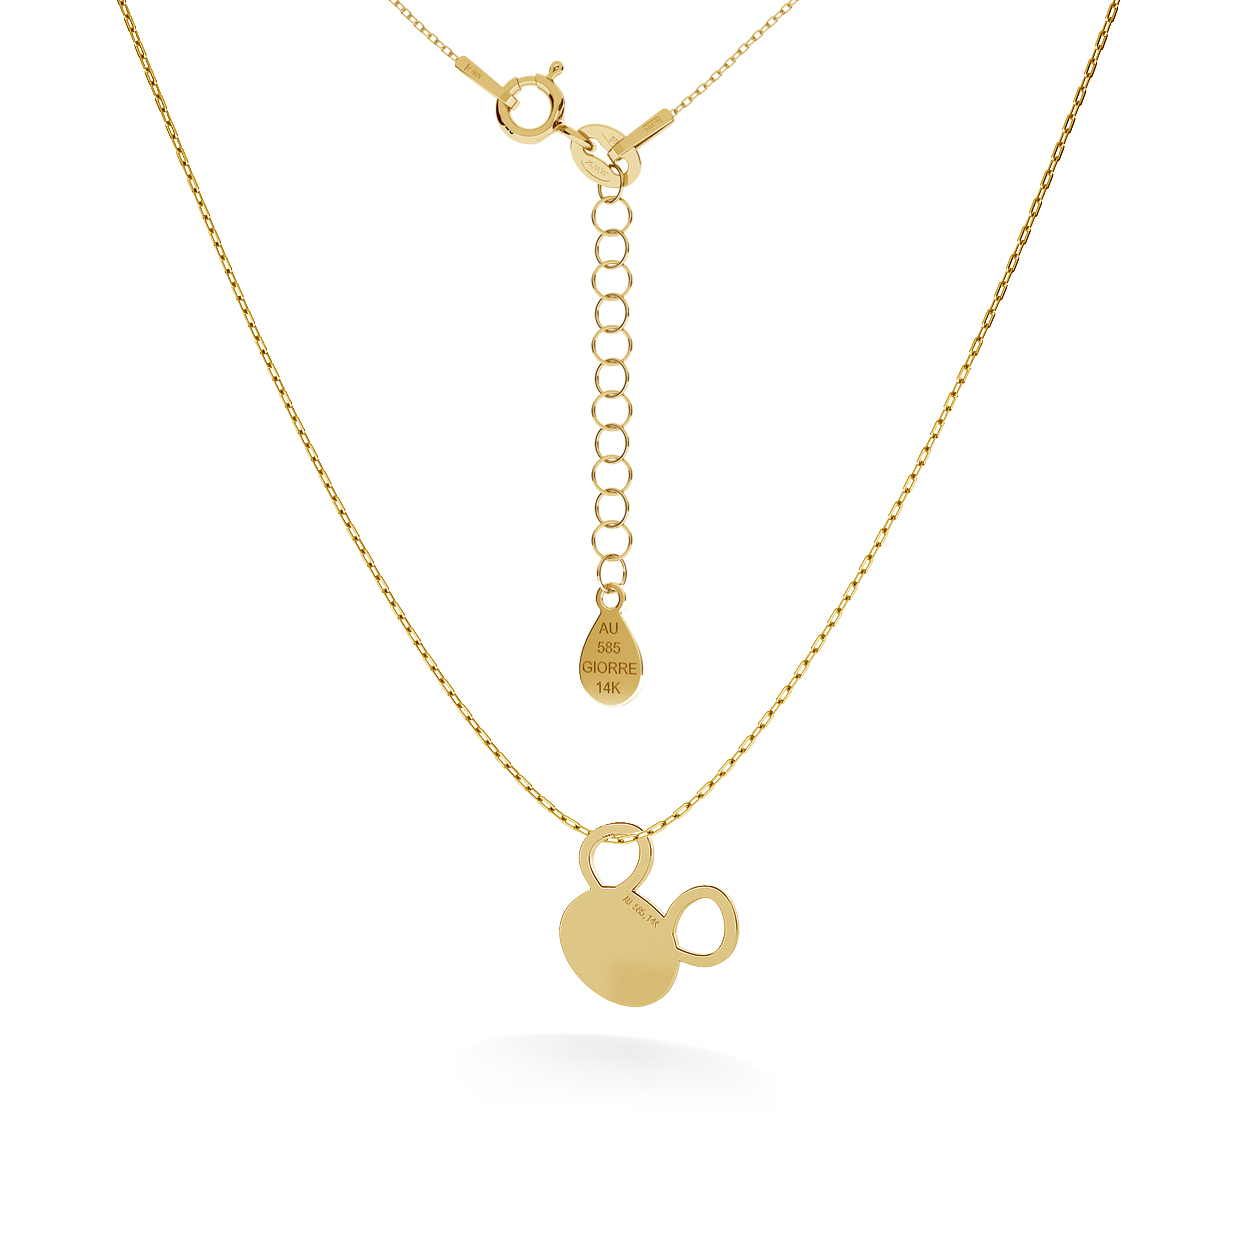 GOLD MOUSE NECKLACE 14K